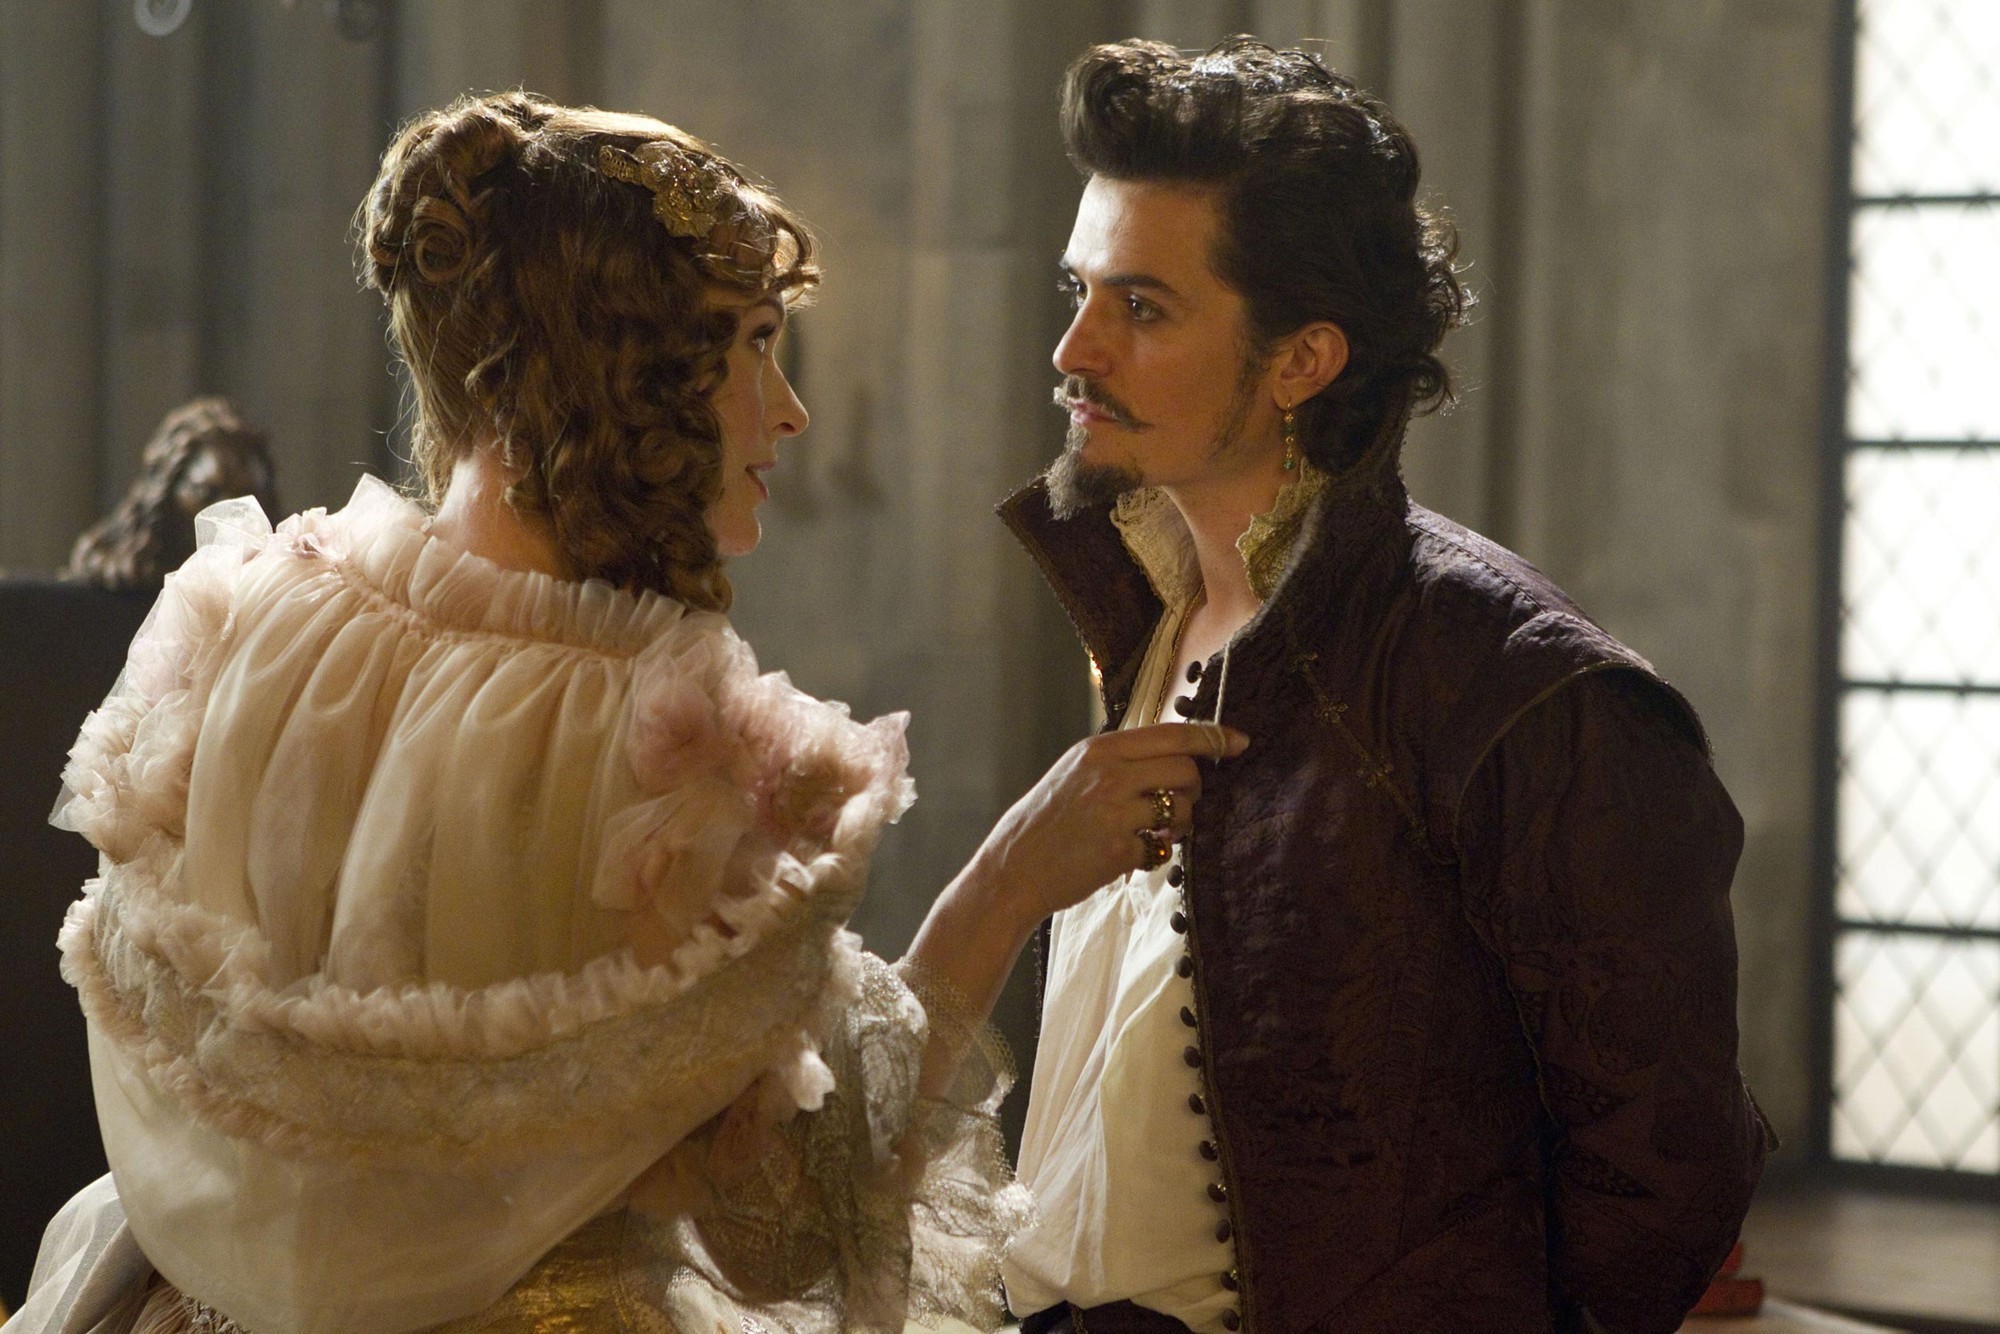 Milla Jovovich stars as M'lady De Winter and Orlando Bloom stars as Duke of Buckingham in Summit Entertainment's The Three Musketeers (2011)